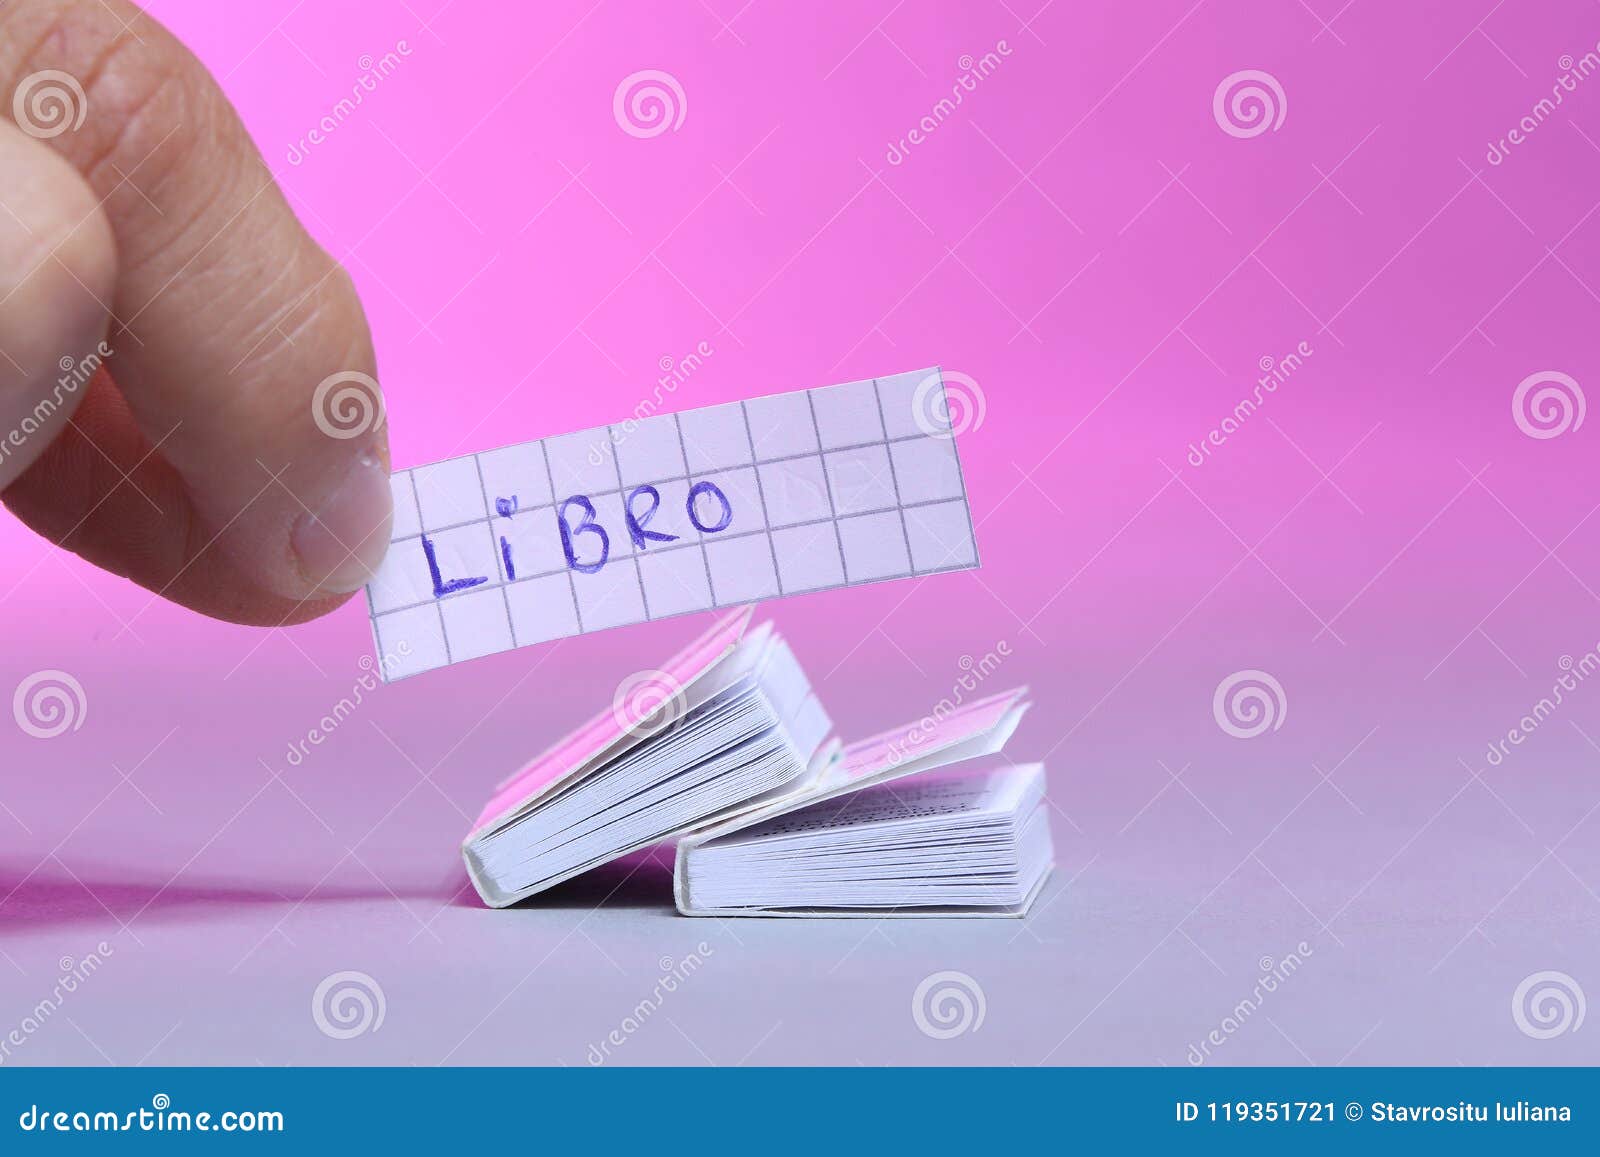 small books, white background. libro is the spanish word